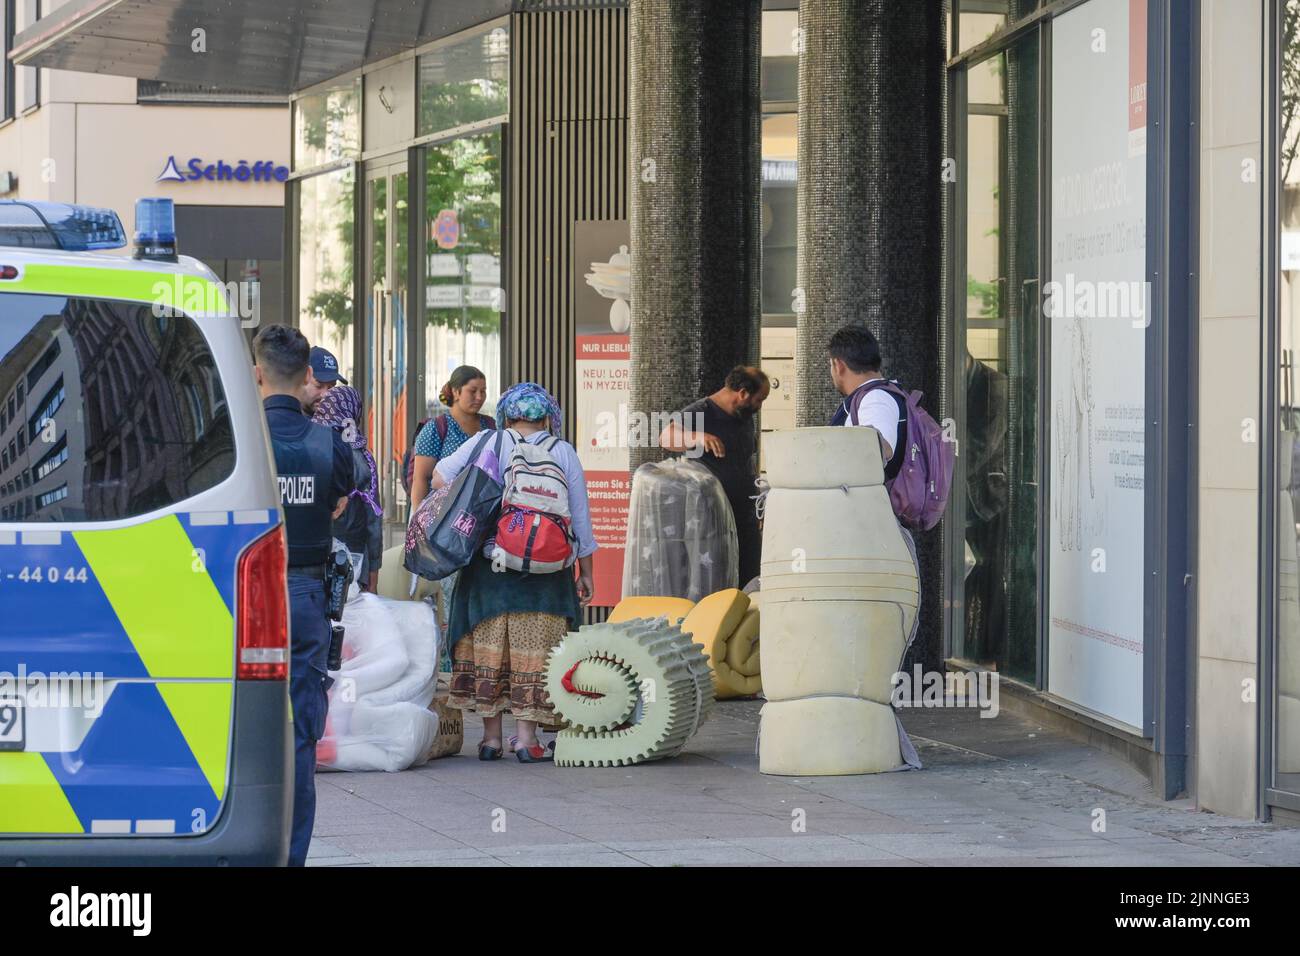 Police clear homeless people's sleeping camps, Schillerstrasse, Frankfurt am Main, Hesse, Germany Stock Photo